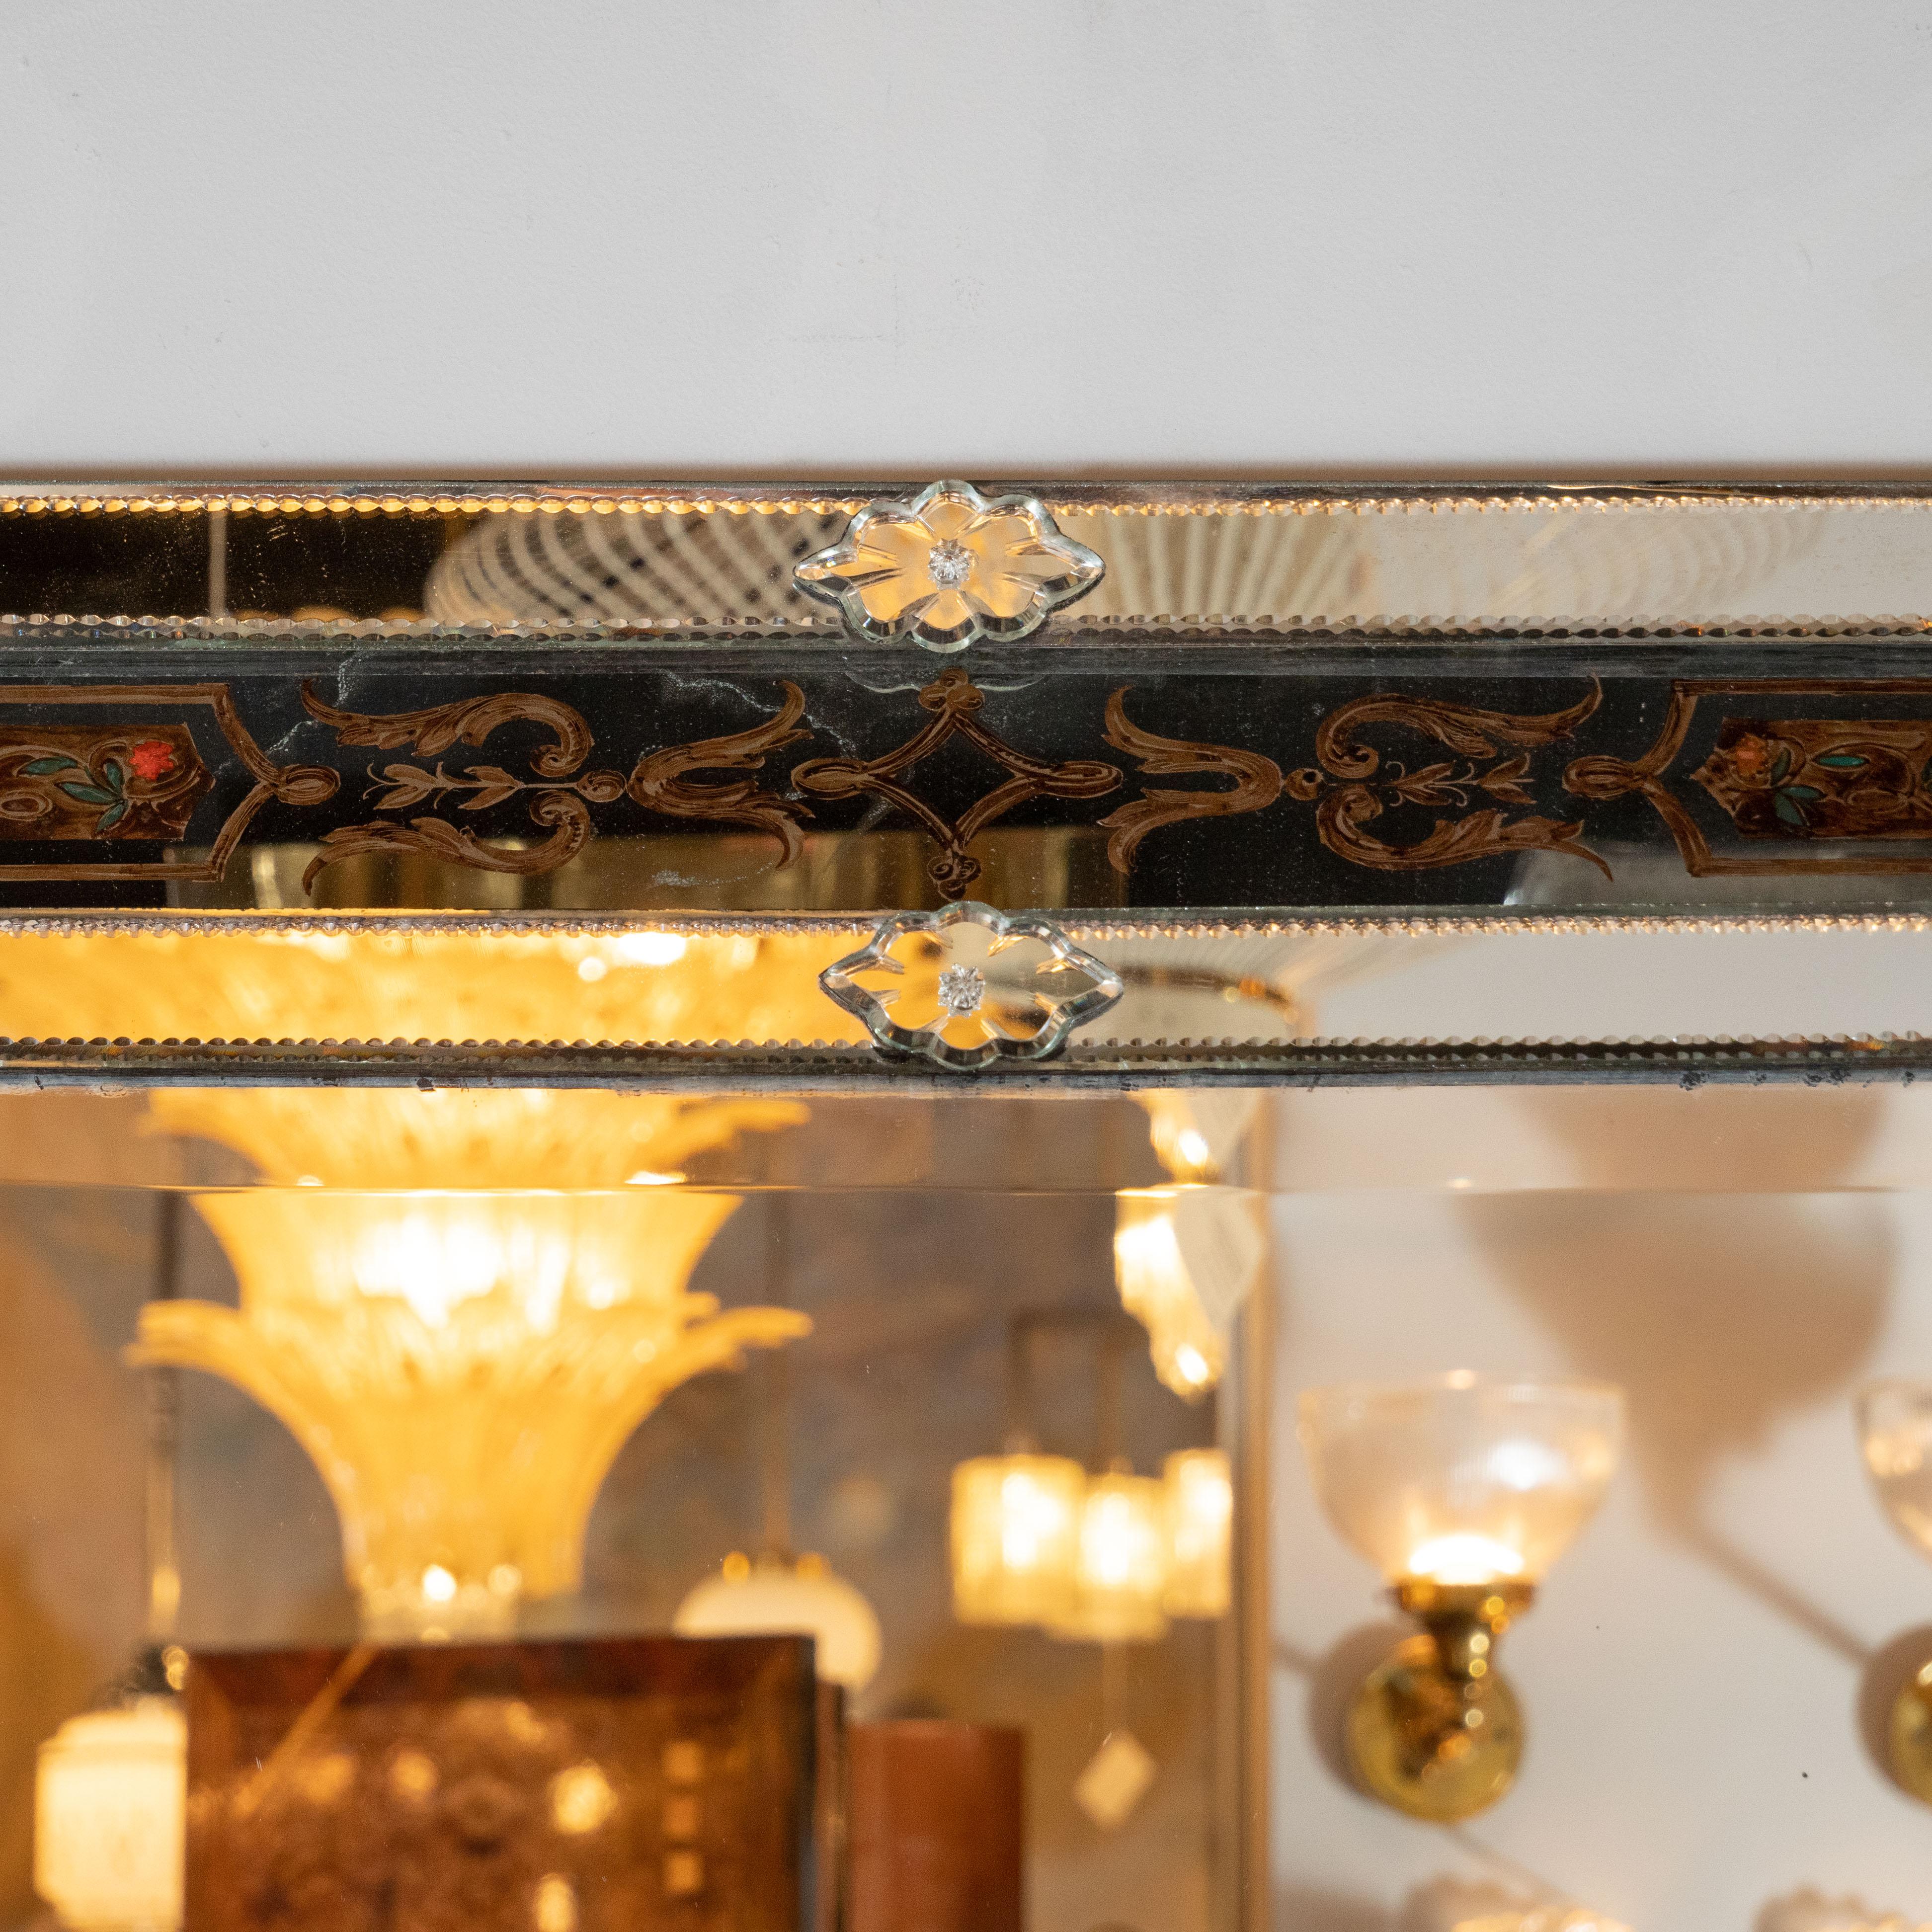 This exquisite Mid-Century Modern shadowbox mirror was realized in France, circa 1950. It features a raised exterior secured at each corner by stylized floral rosettes and chain bevel detailing circumscribing the top and bottom edge. The raised